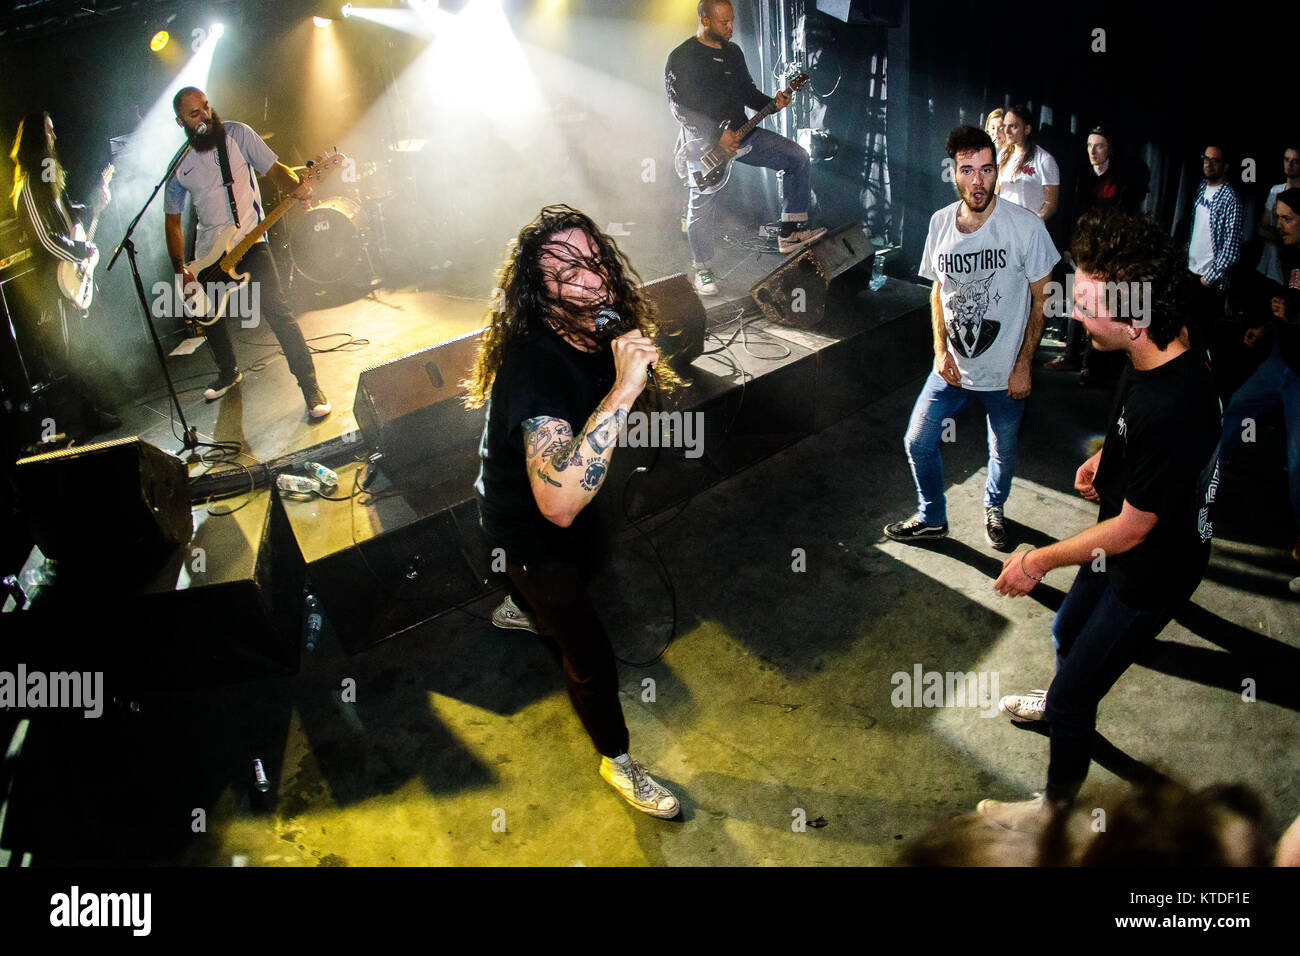 The American hardcore punk band Trash Talk performs a live concert at  Pumpehuset in Copenhagen. Here vocalist Lee Spielman is seen among the  concert crowds. Denmark, 13/03 2017 Stock Photo - Alamy